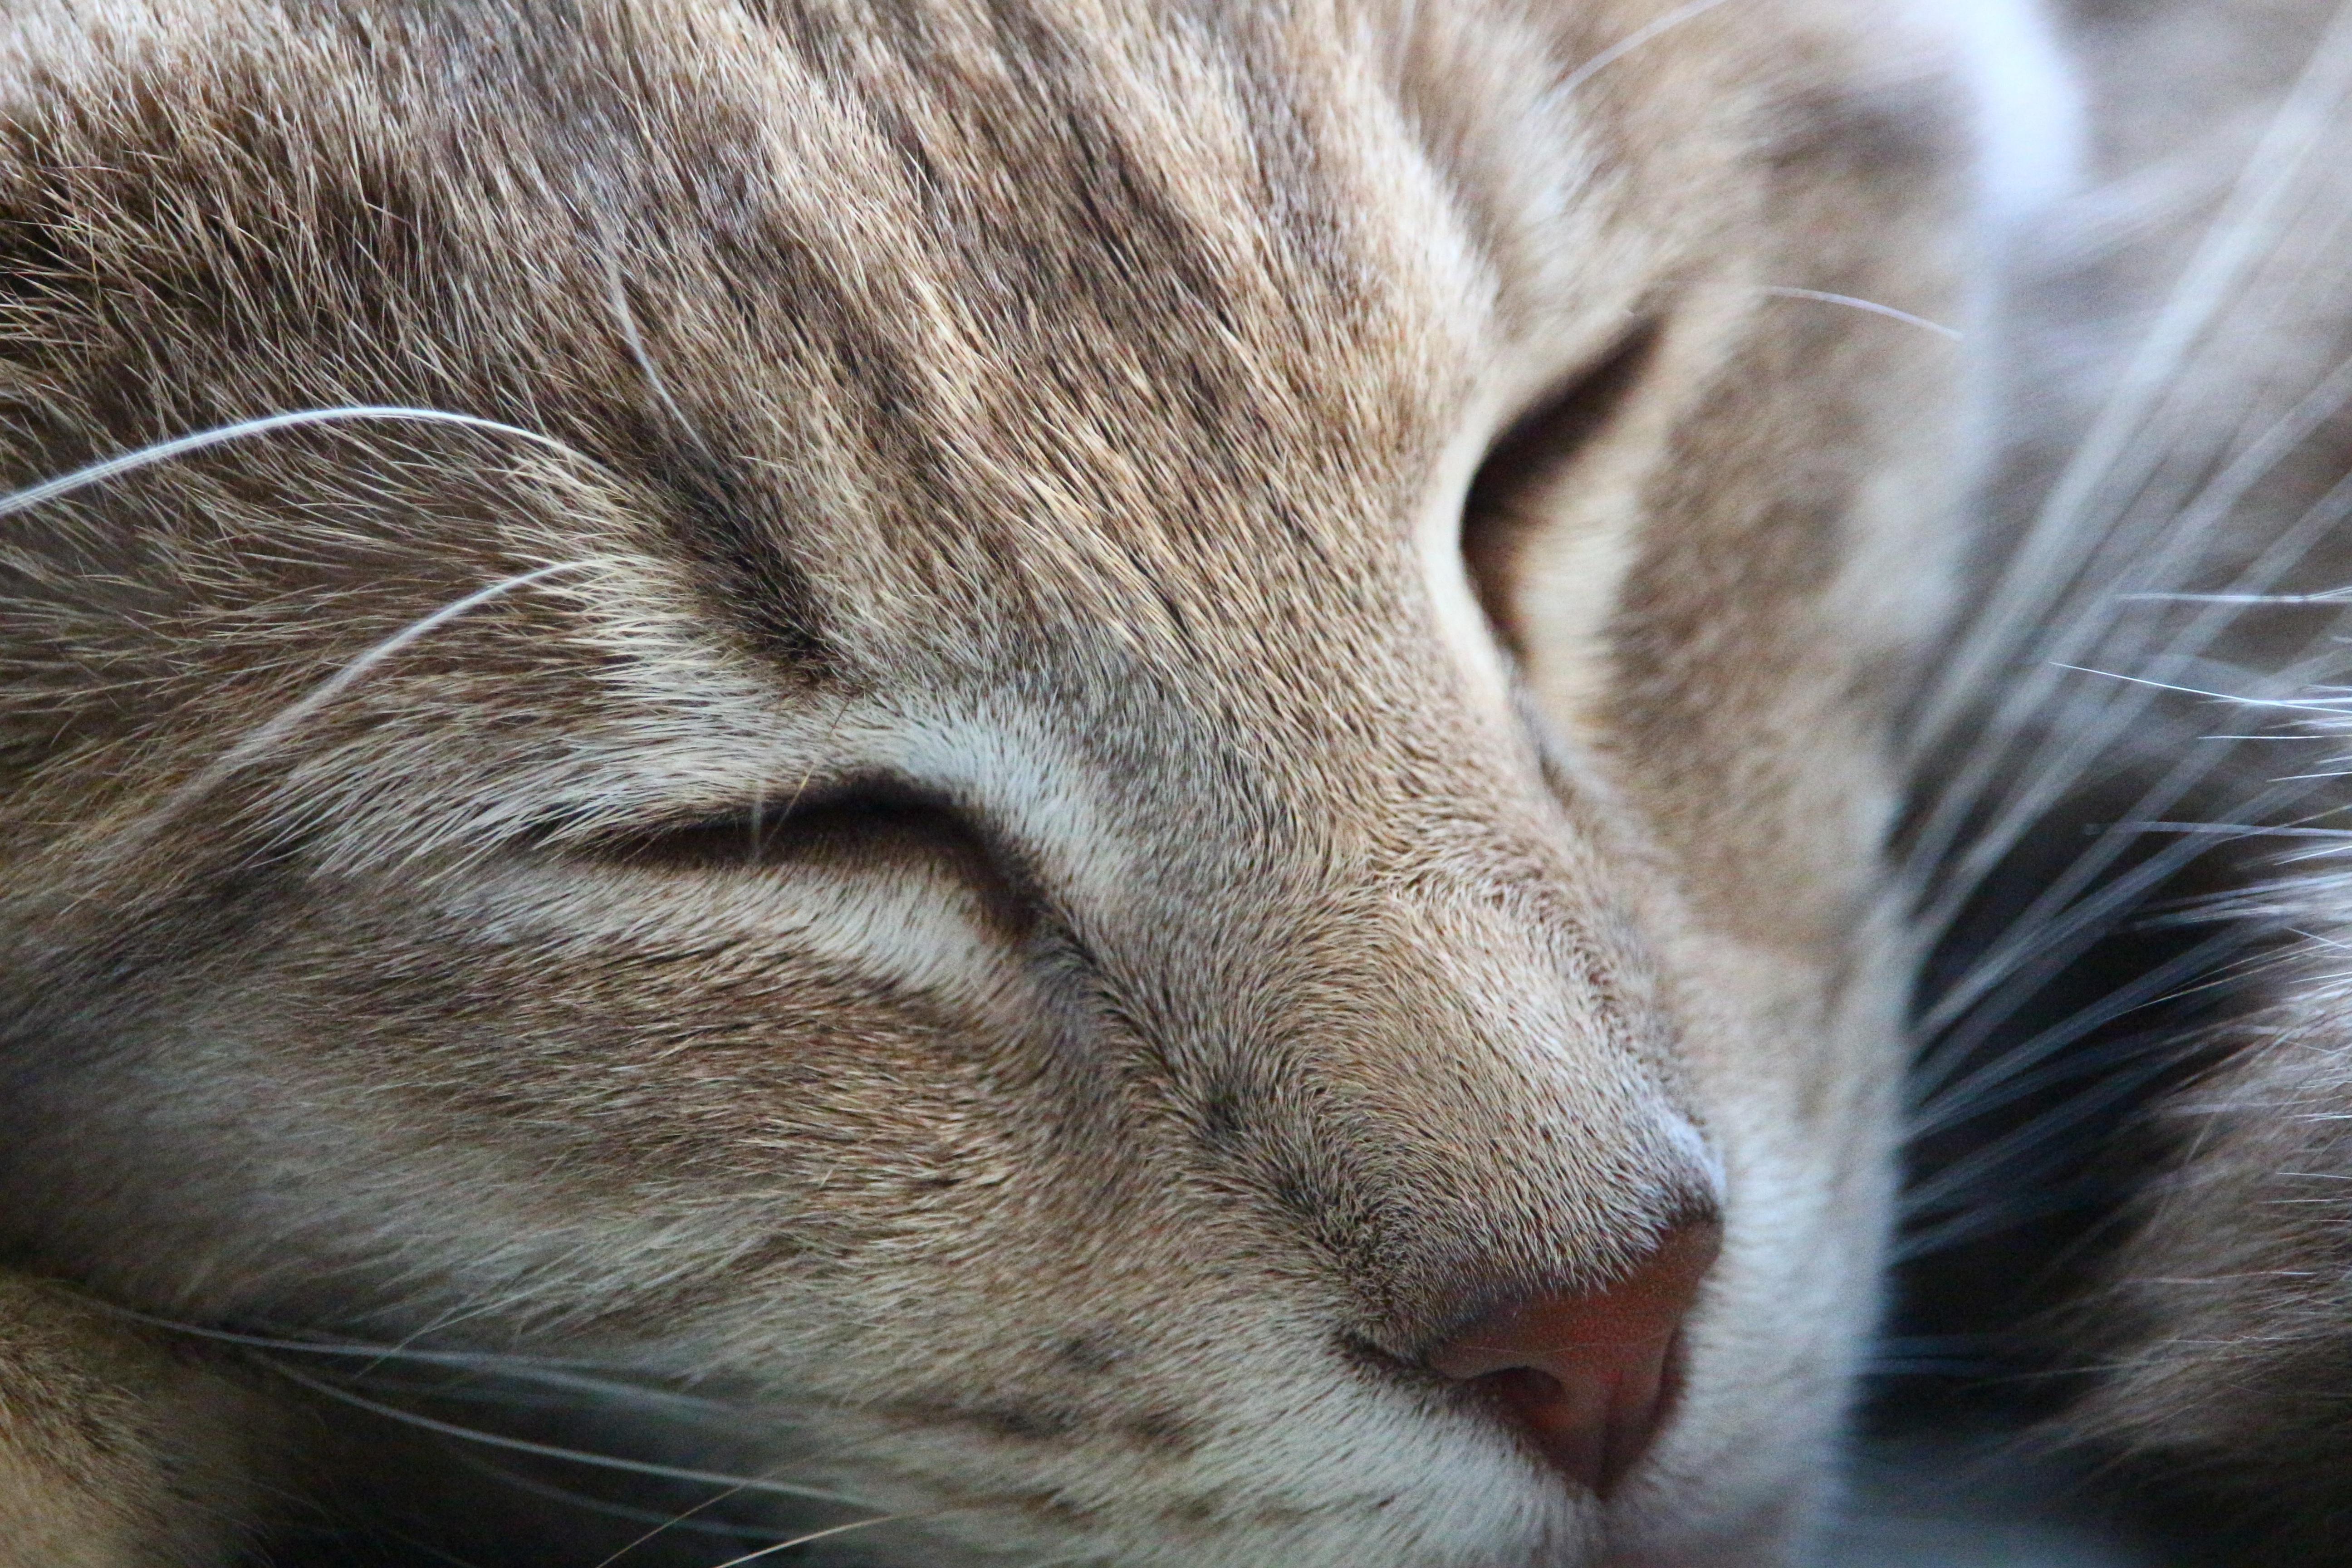 Free download wallpaper Cats, Cat, Muzzle, Animal, Sleeping on your PC desktop